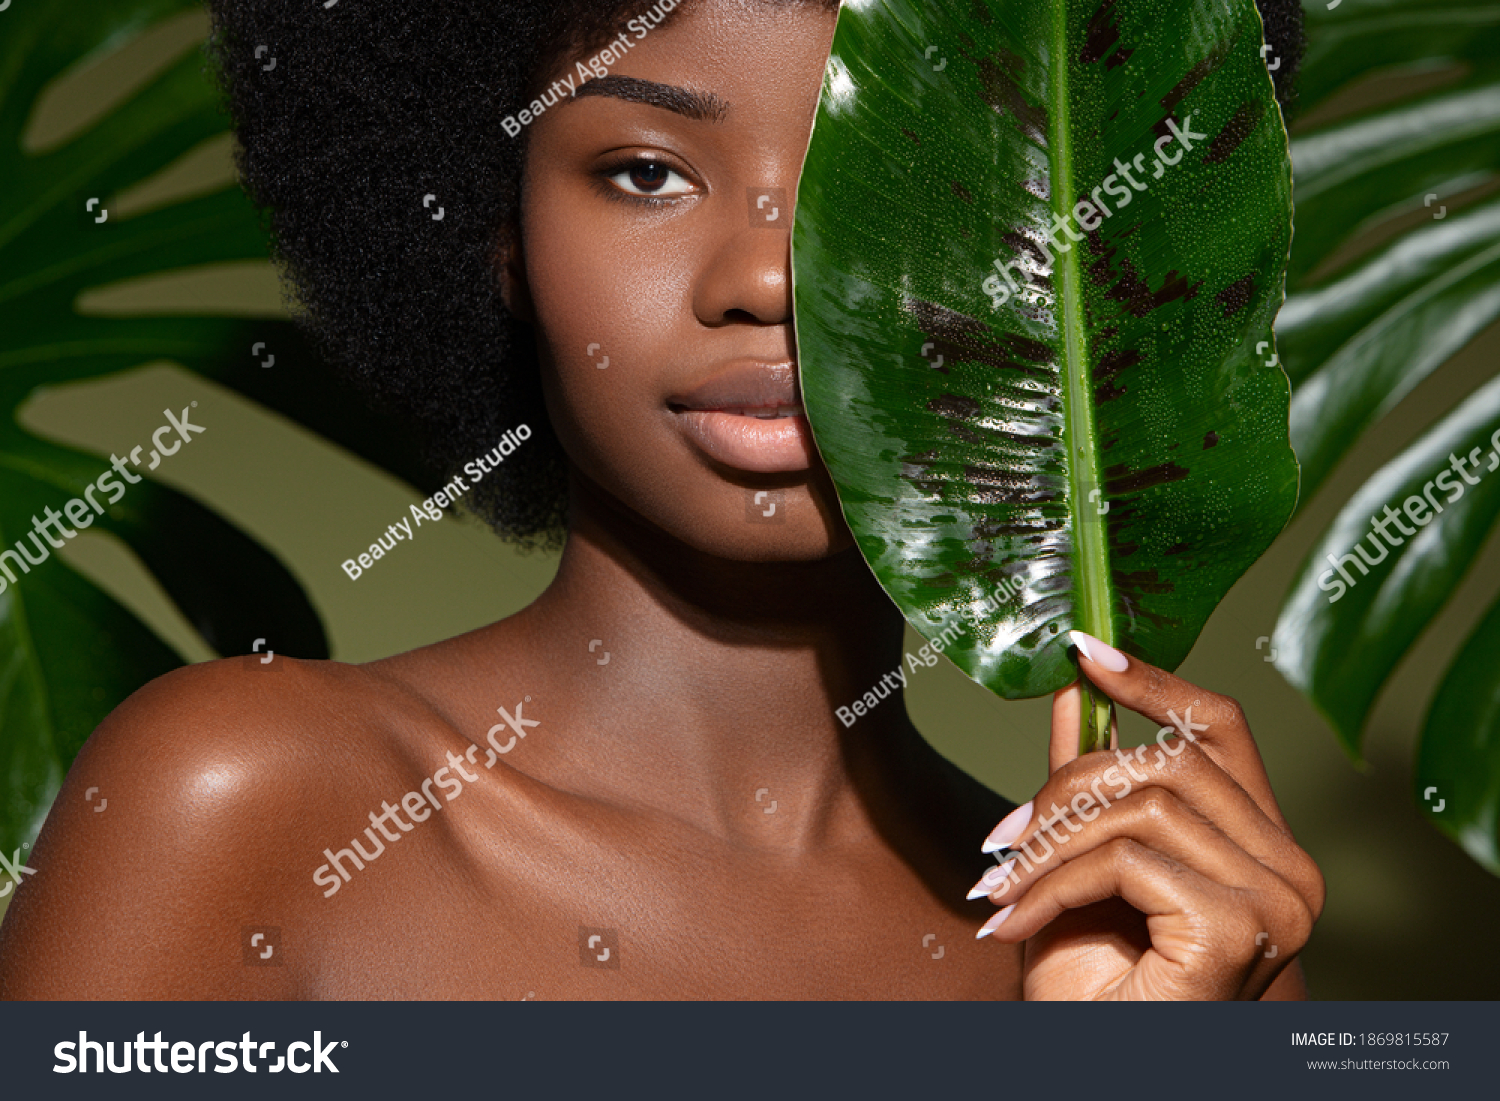 Beauty portrait of young beautiful african american woman with posing with banana leaf curly hair against green exotixc plants  background. Natural skin care concept #1869815587